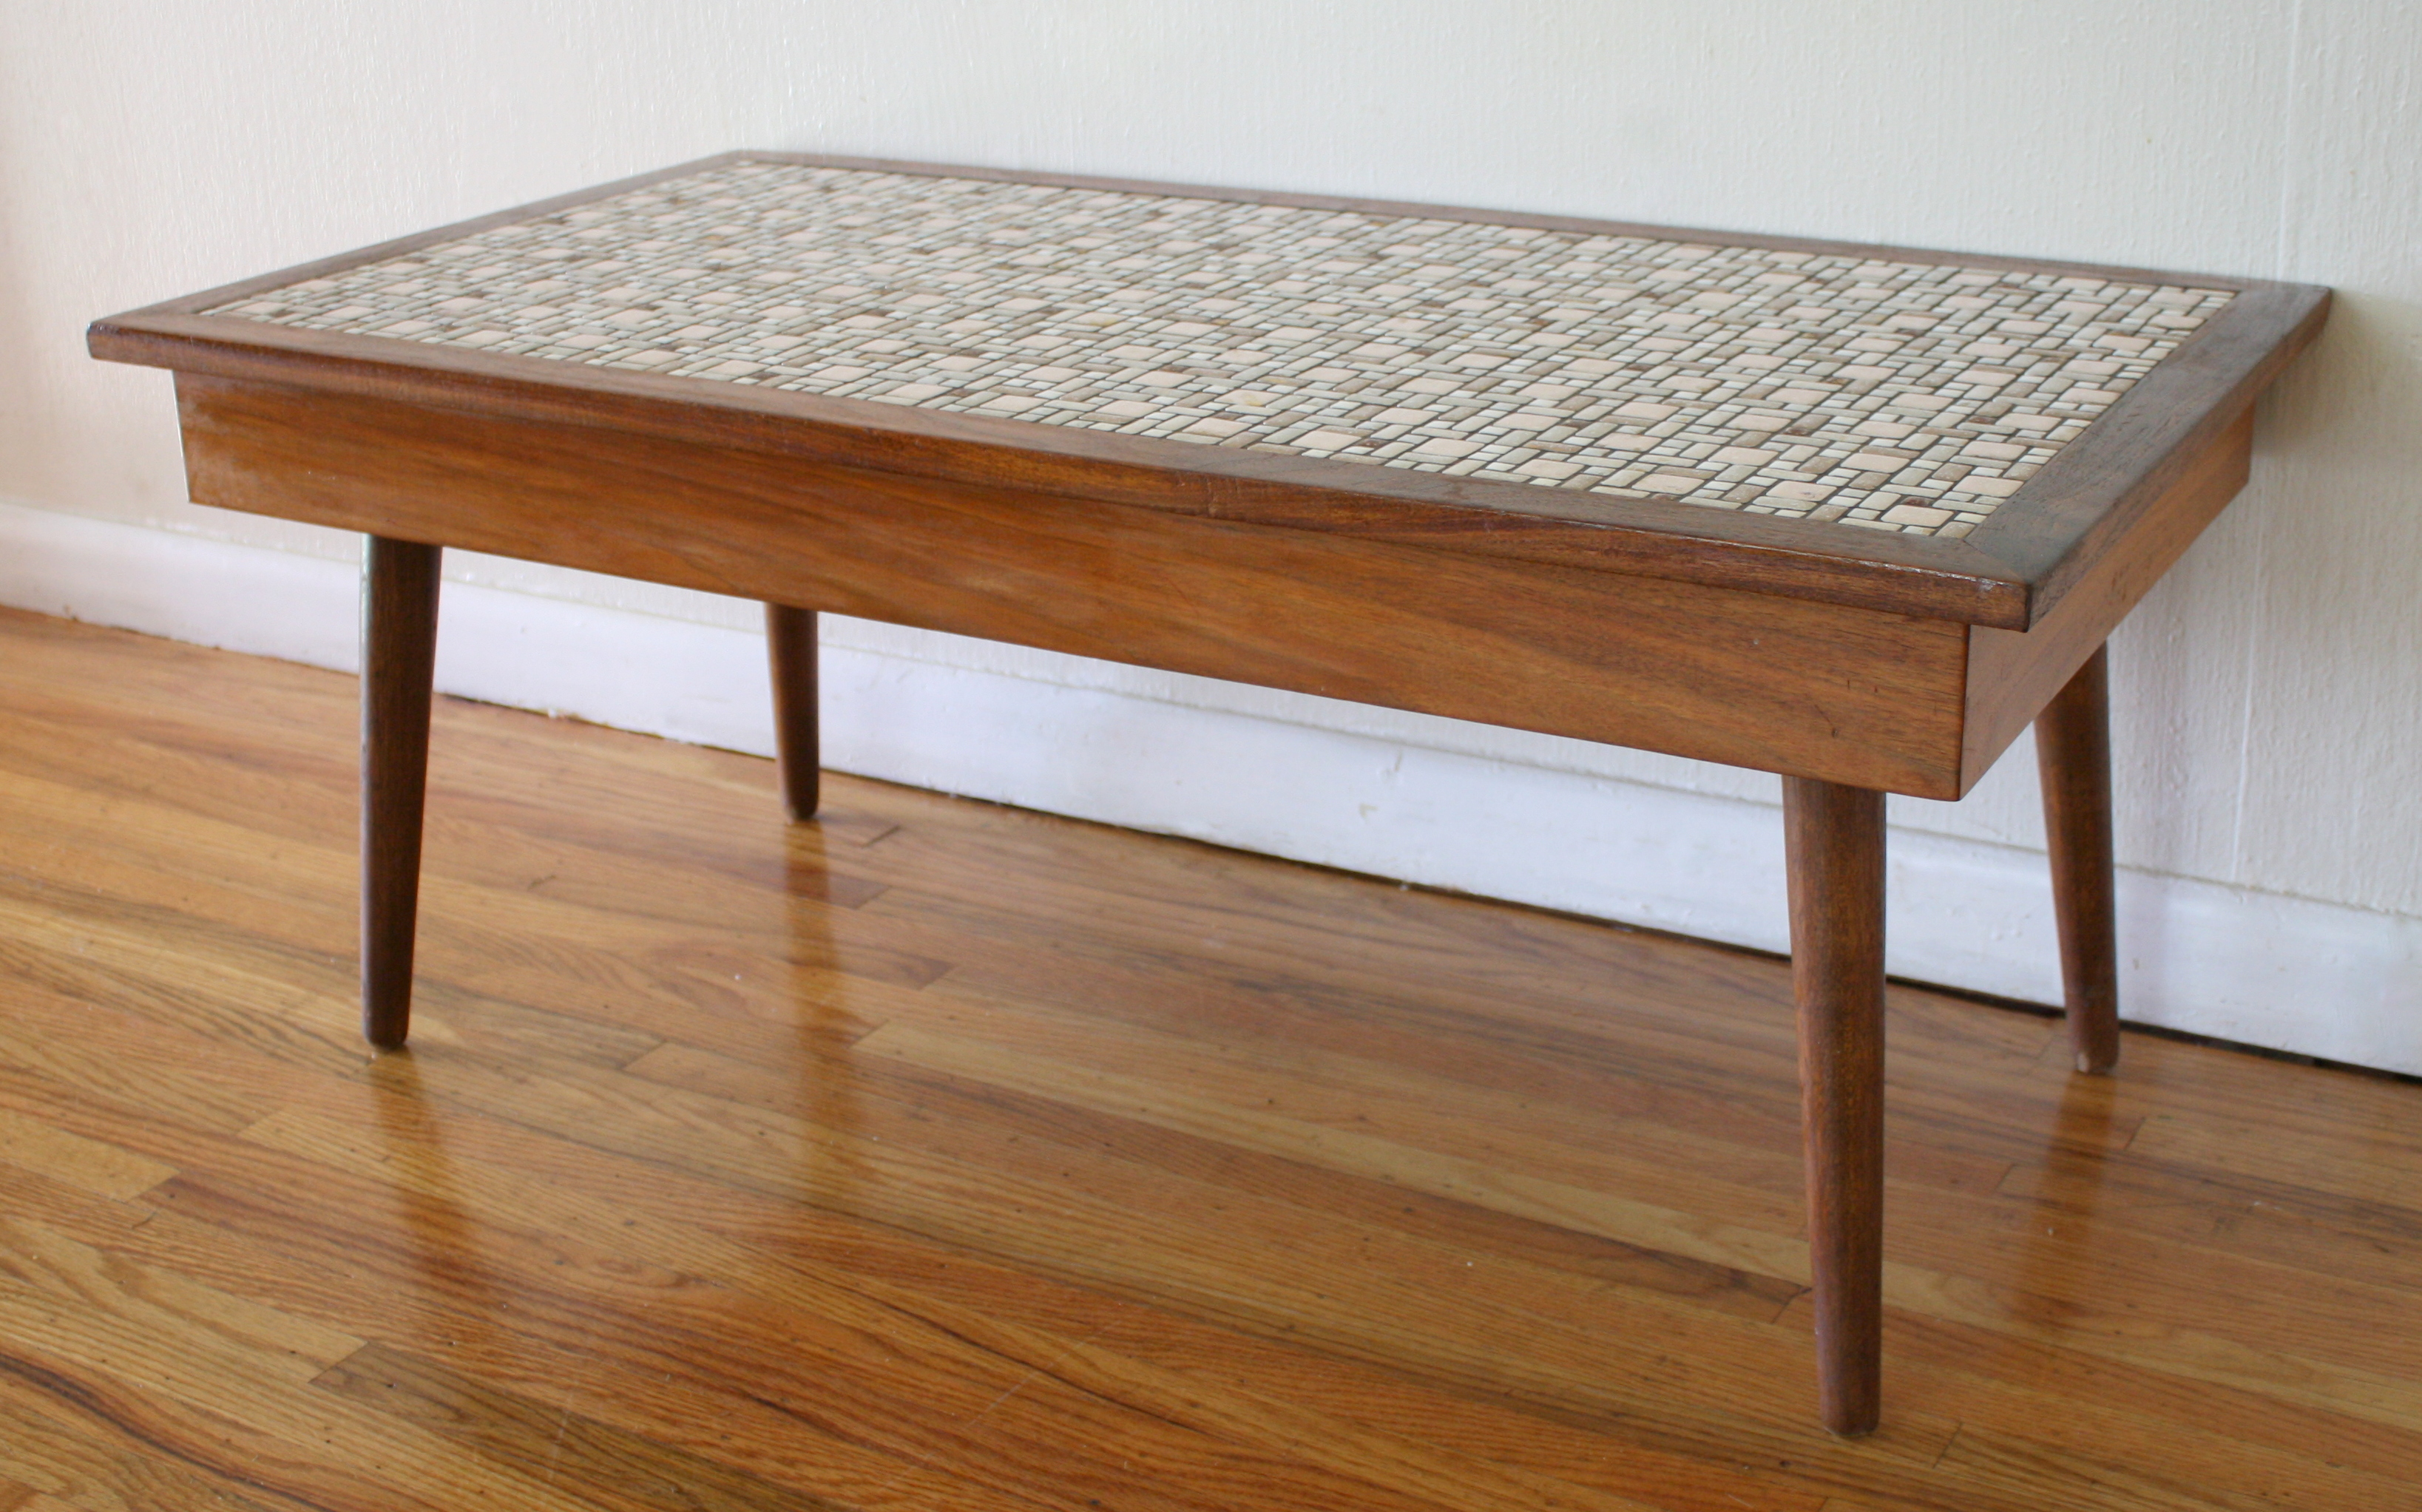 This is a mid century modern coffee table with beautiful retro tile 